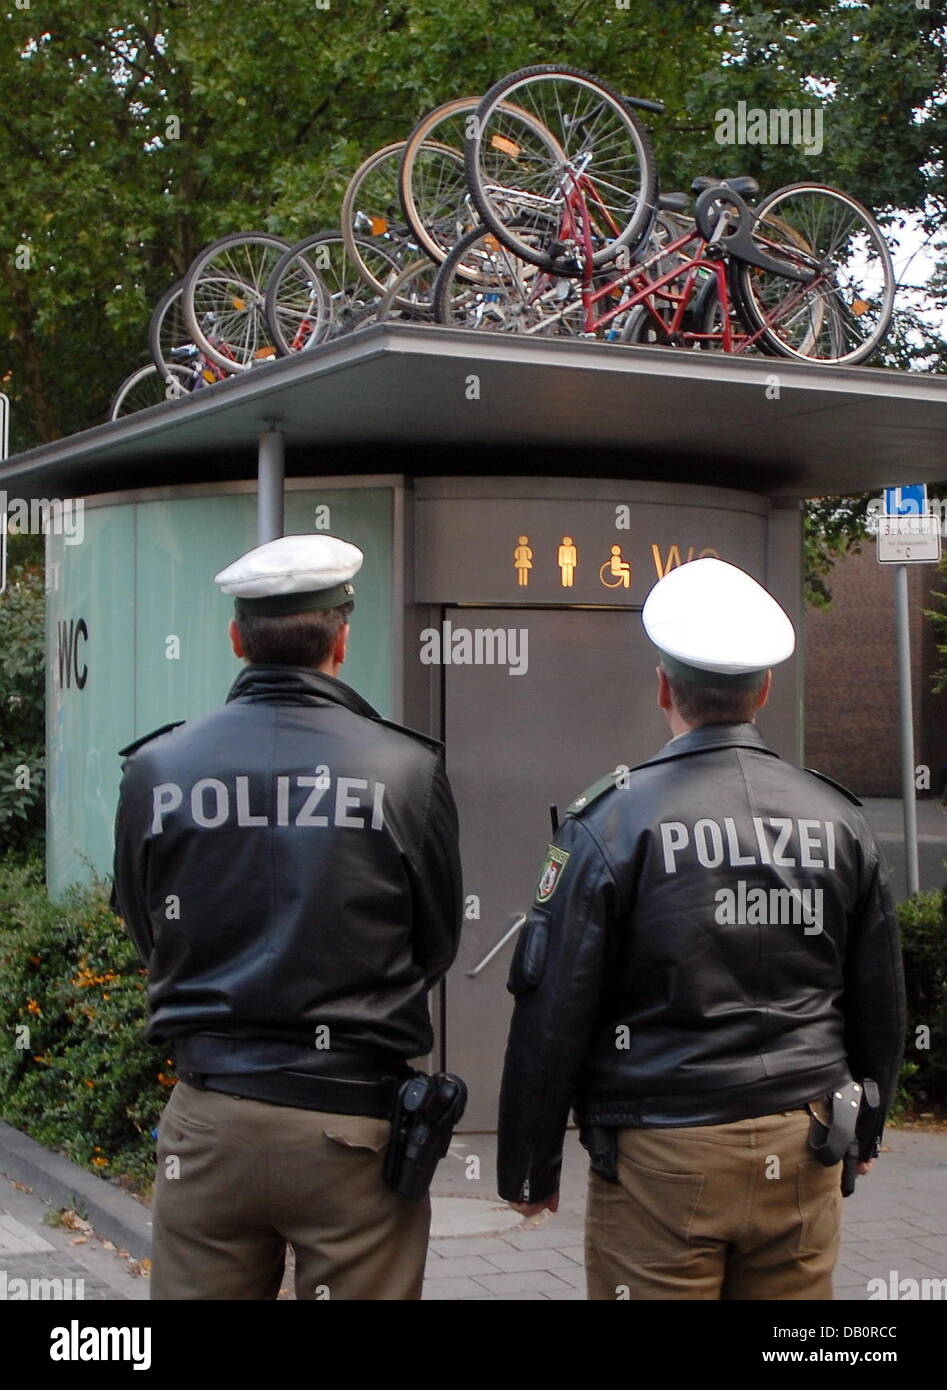 Policemen take a look at several bikes arranged on a public toilet in Muenster, Germany, 19 September 2007. The art exhibition 'sculpture projects' seemed to have inspired someone's creativity. It is not an authorised work of the exhibition. Photo: Polizei Muenster Stock Photo